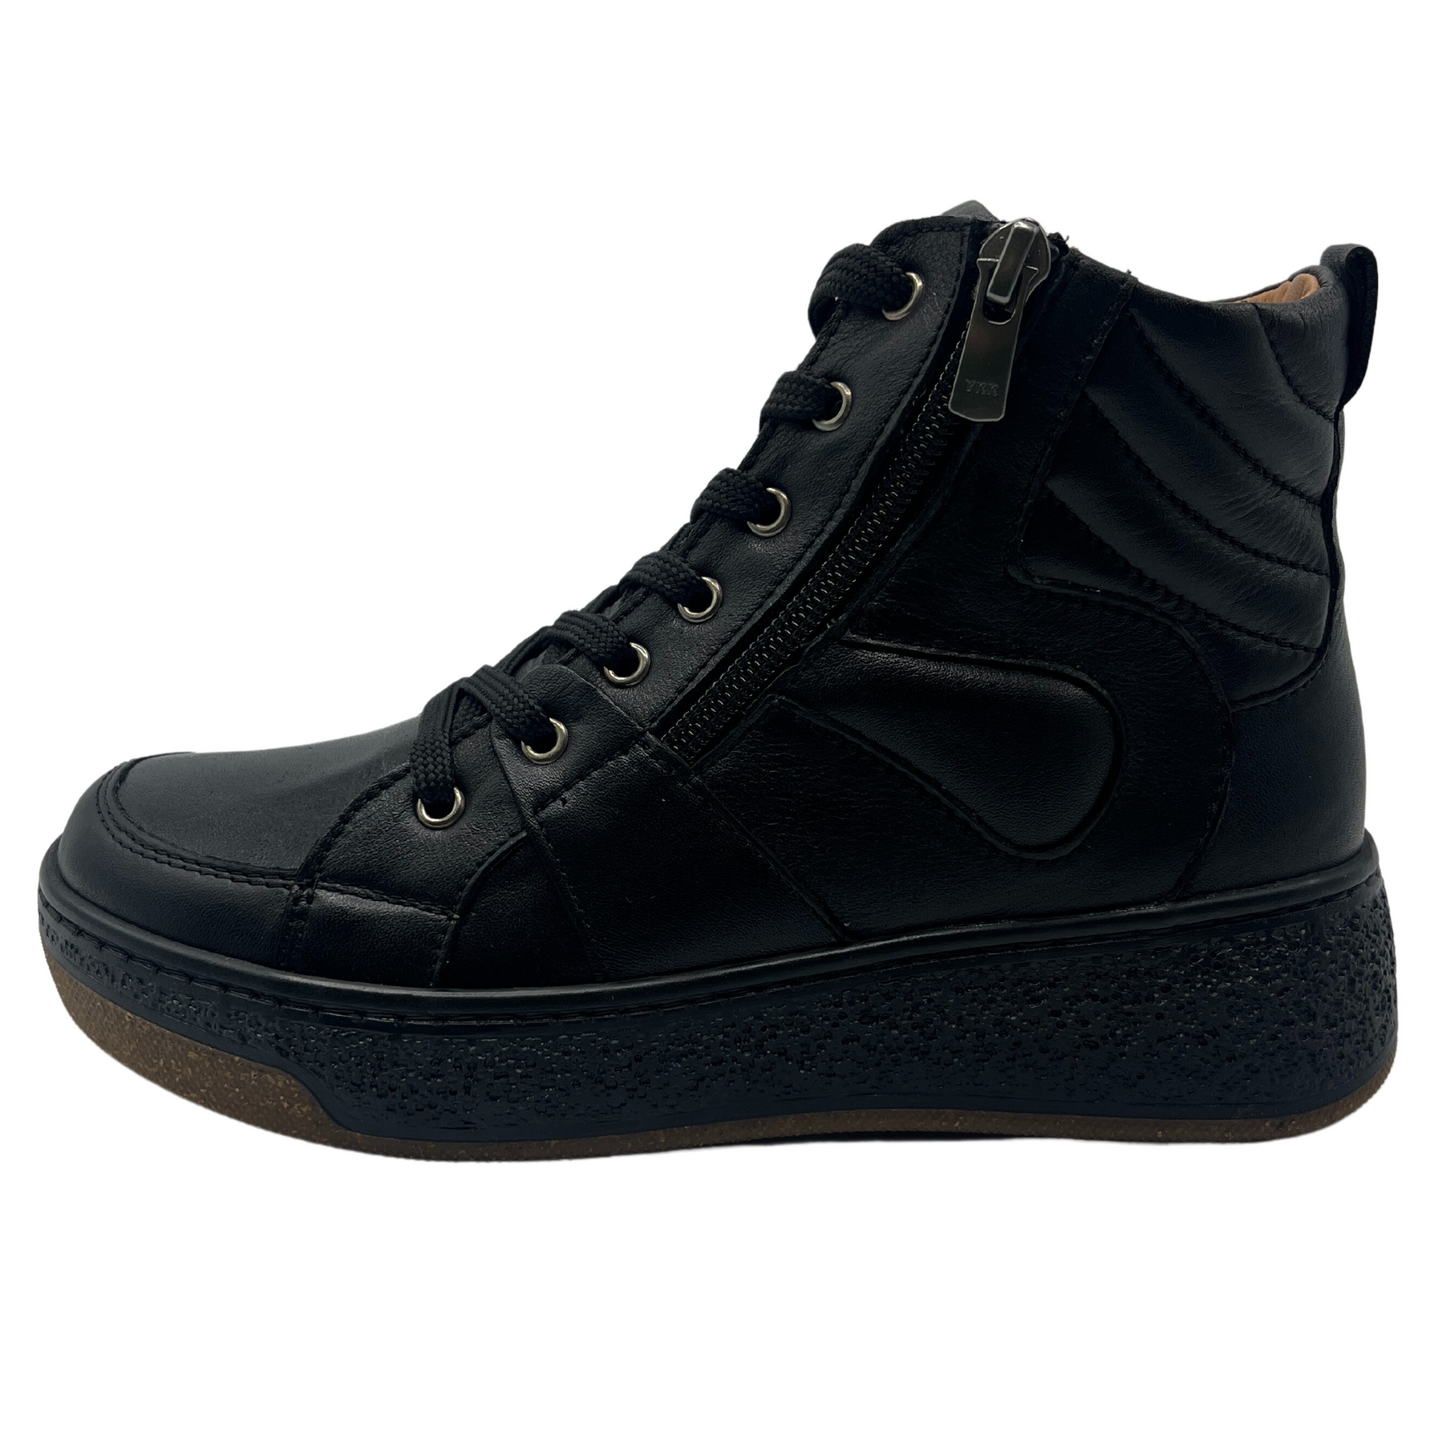 Left facing view of black leather short boot with side zipper closure and black laces